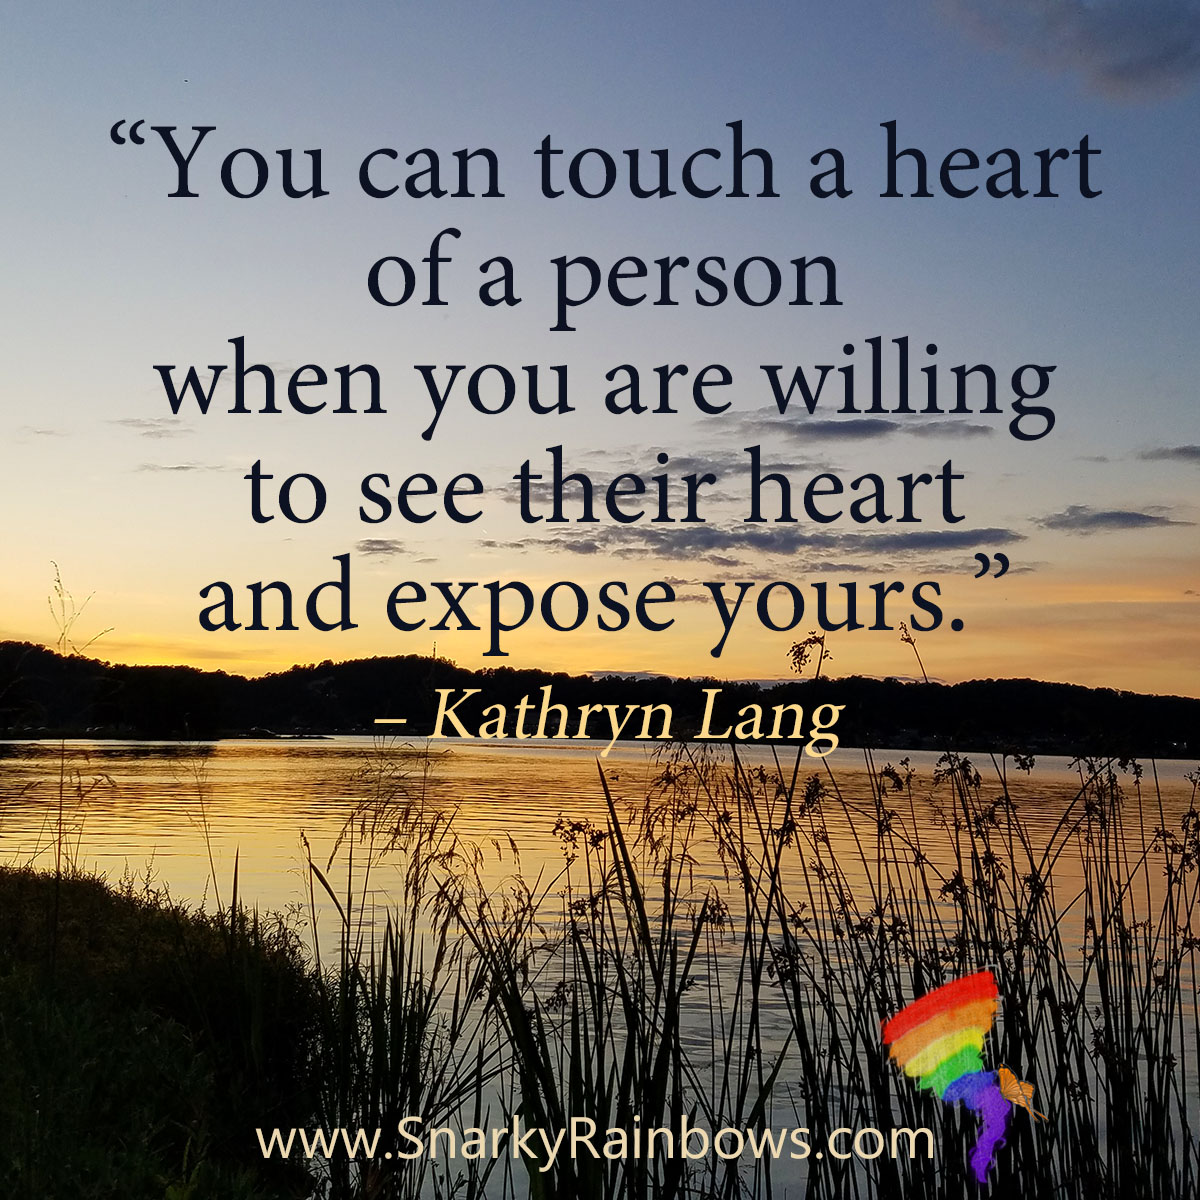 #QuoteoftheDay

You can touch a heart of a person when you are willing to see their heart and expose yours.
- Kathryn Lang